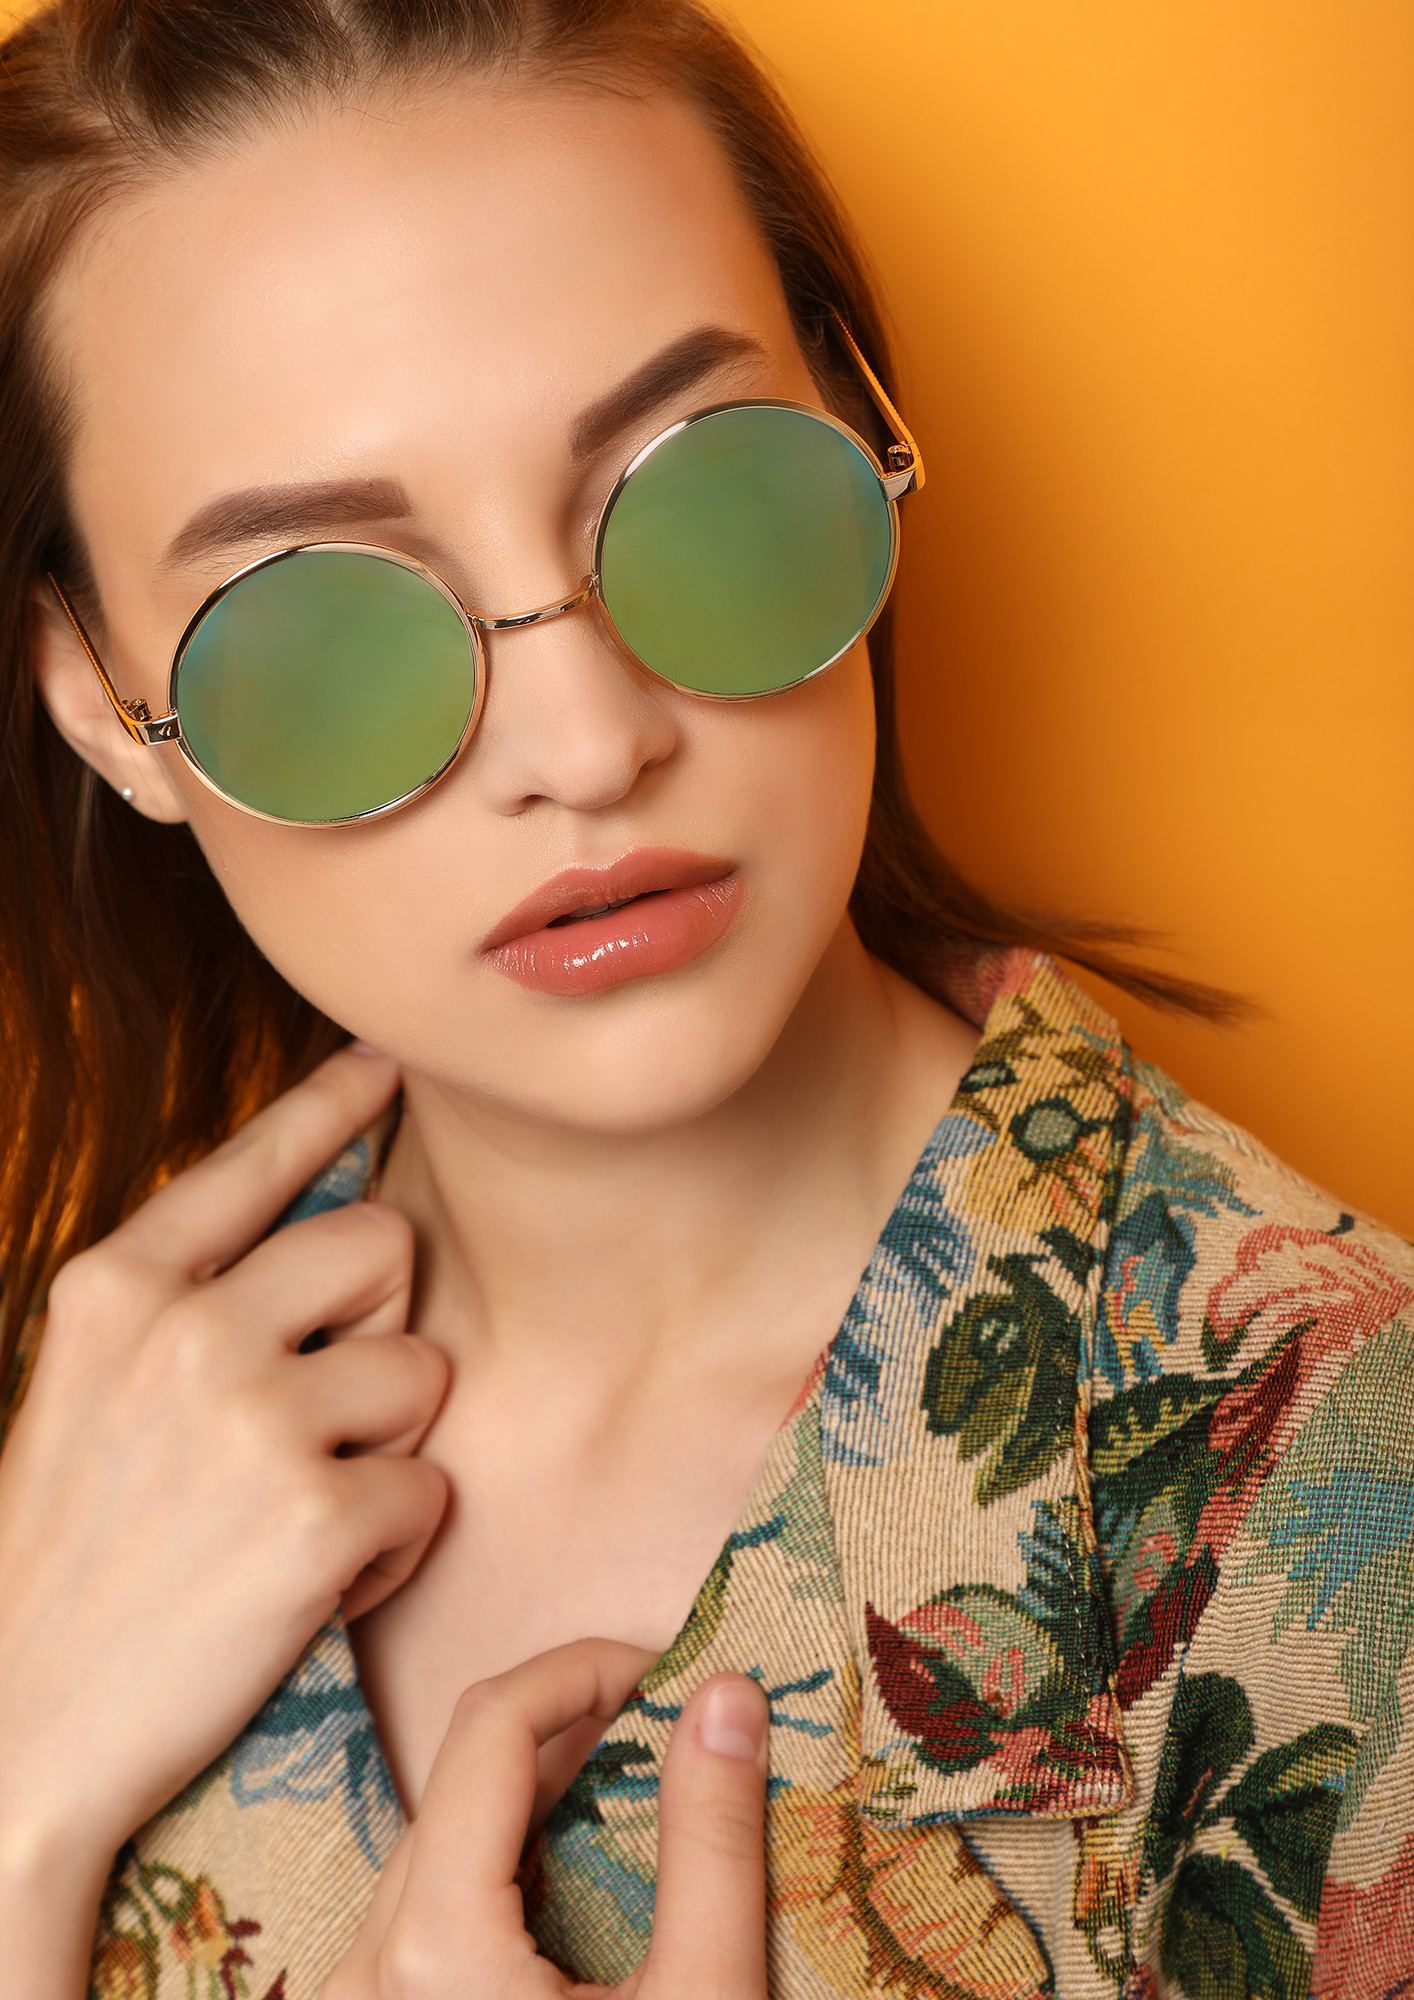 LIFE IS A CIRCLE GOLDEN ROUND SUNGLASSES